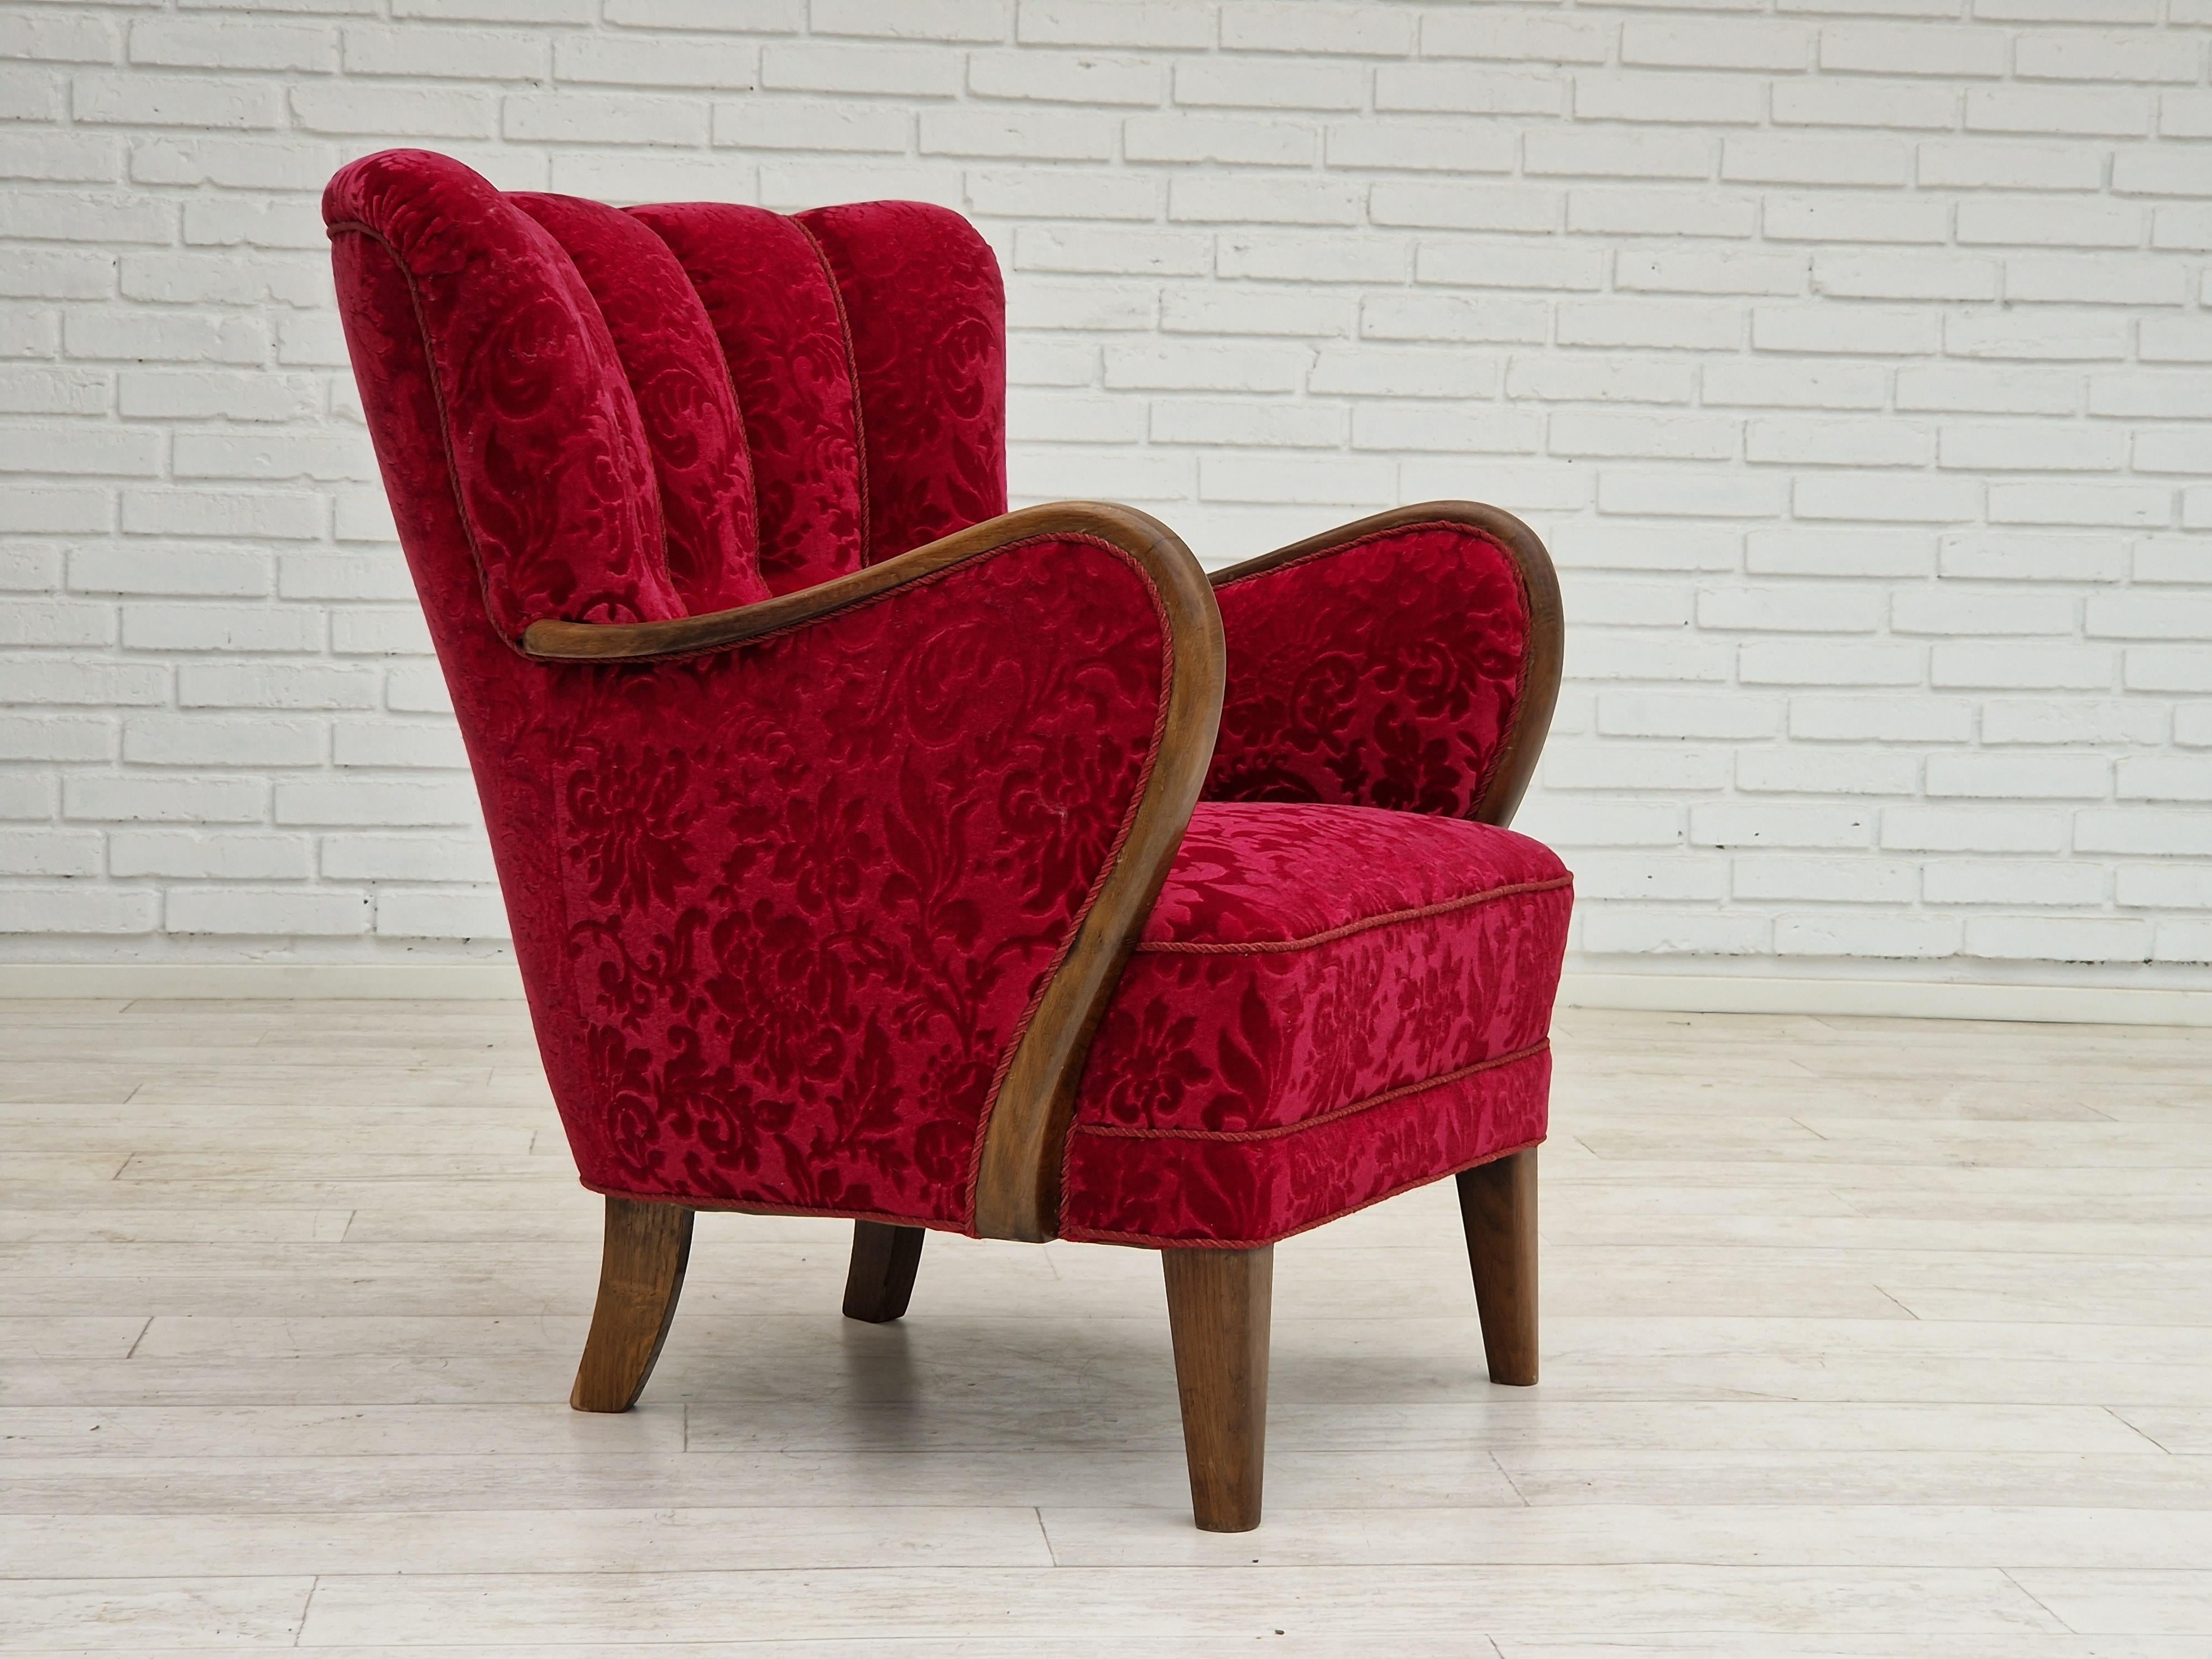 1960s, Danish design by Alfred Christensen. Lounge chair in original cherry-red furniture fabric. Very good condition: no smells and no stains (used not too much from 1960s). Springs in the seat, beech wood legs, and armrest. Made by Danish